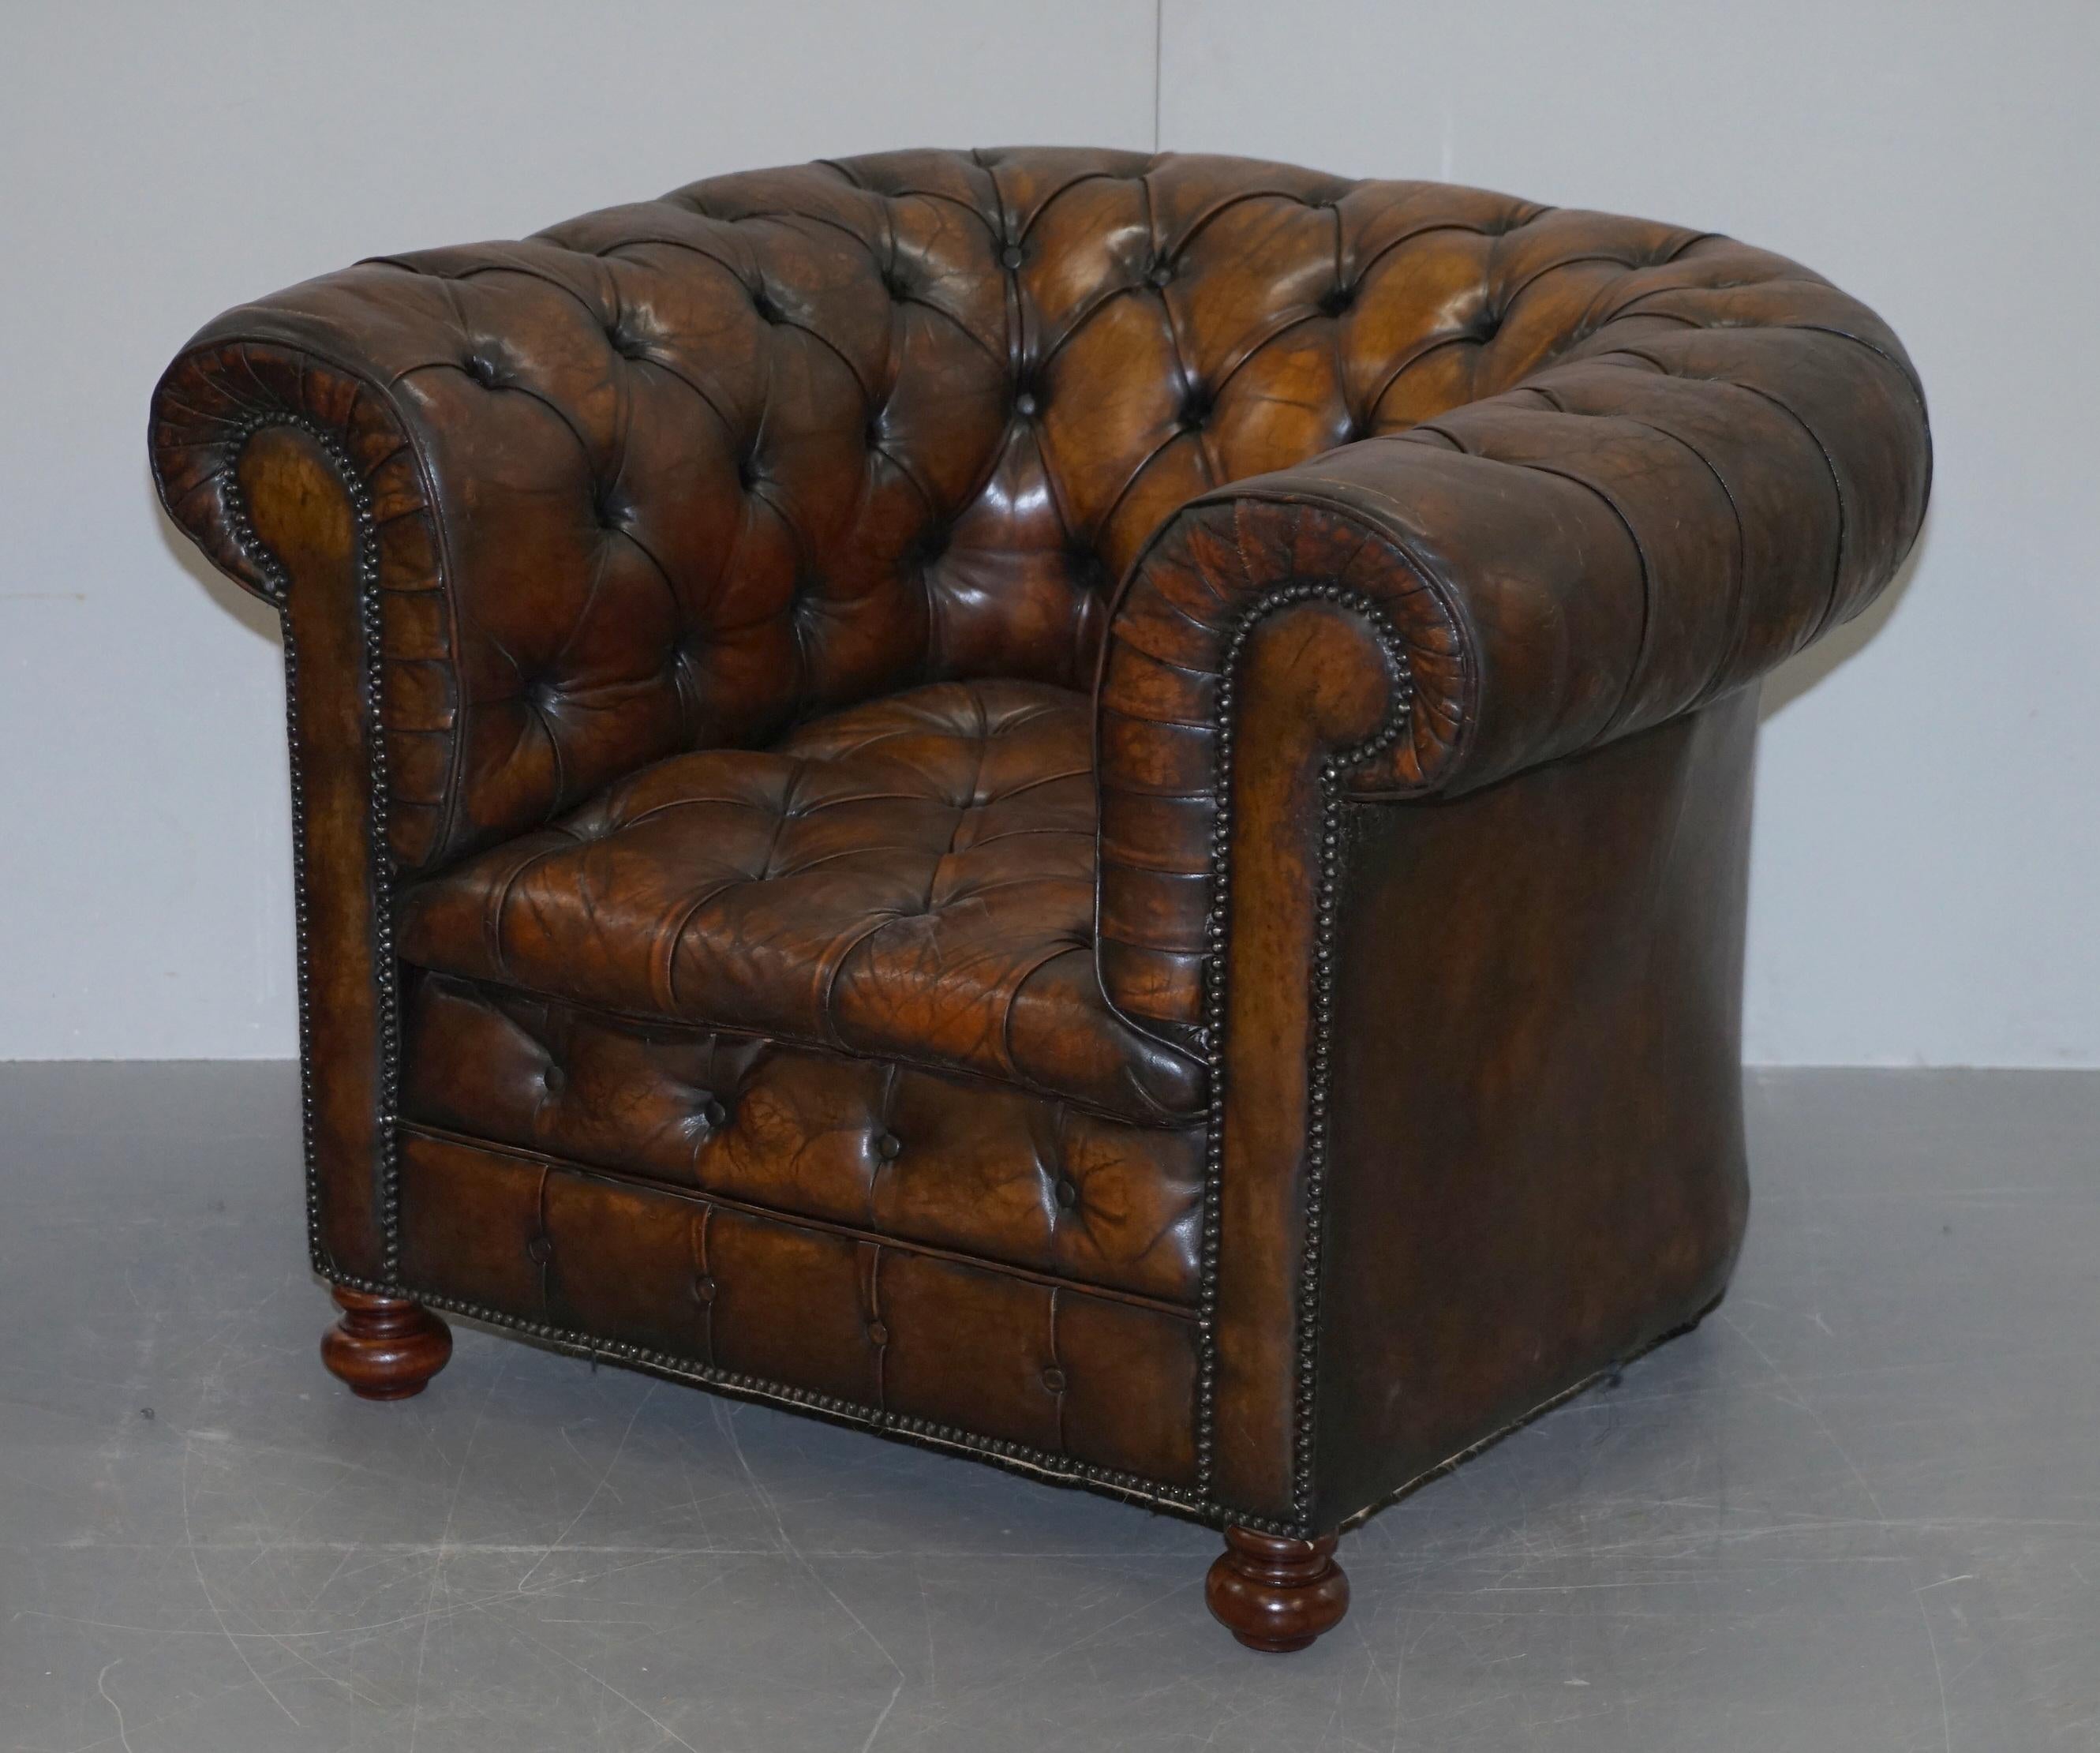 We are delighted to offer for sale this lovely original pair of circa 1900s fully restored hand dyed cigar brown leather Chesterfield fully buttoned club armchairs

A good looking and iconic pair of English club armchairs. Known the world over as